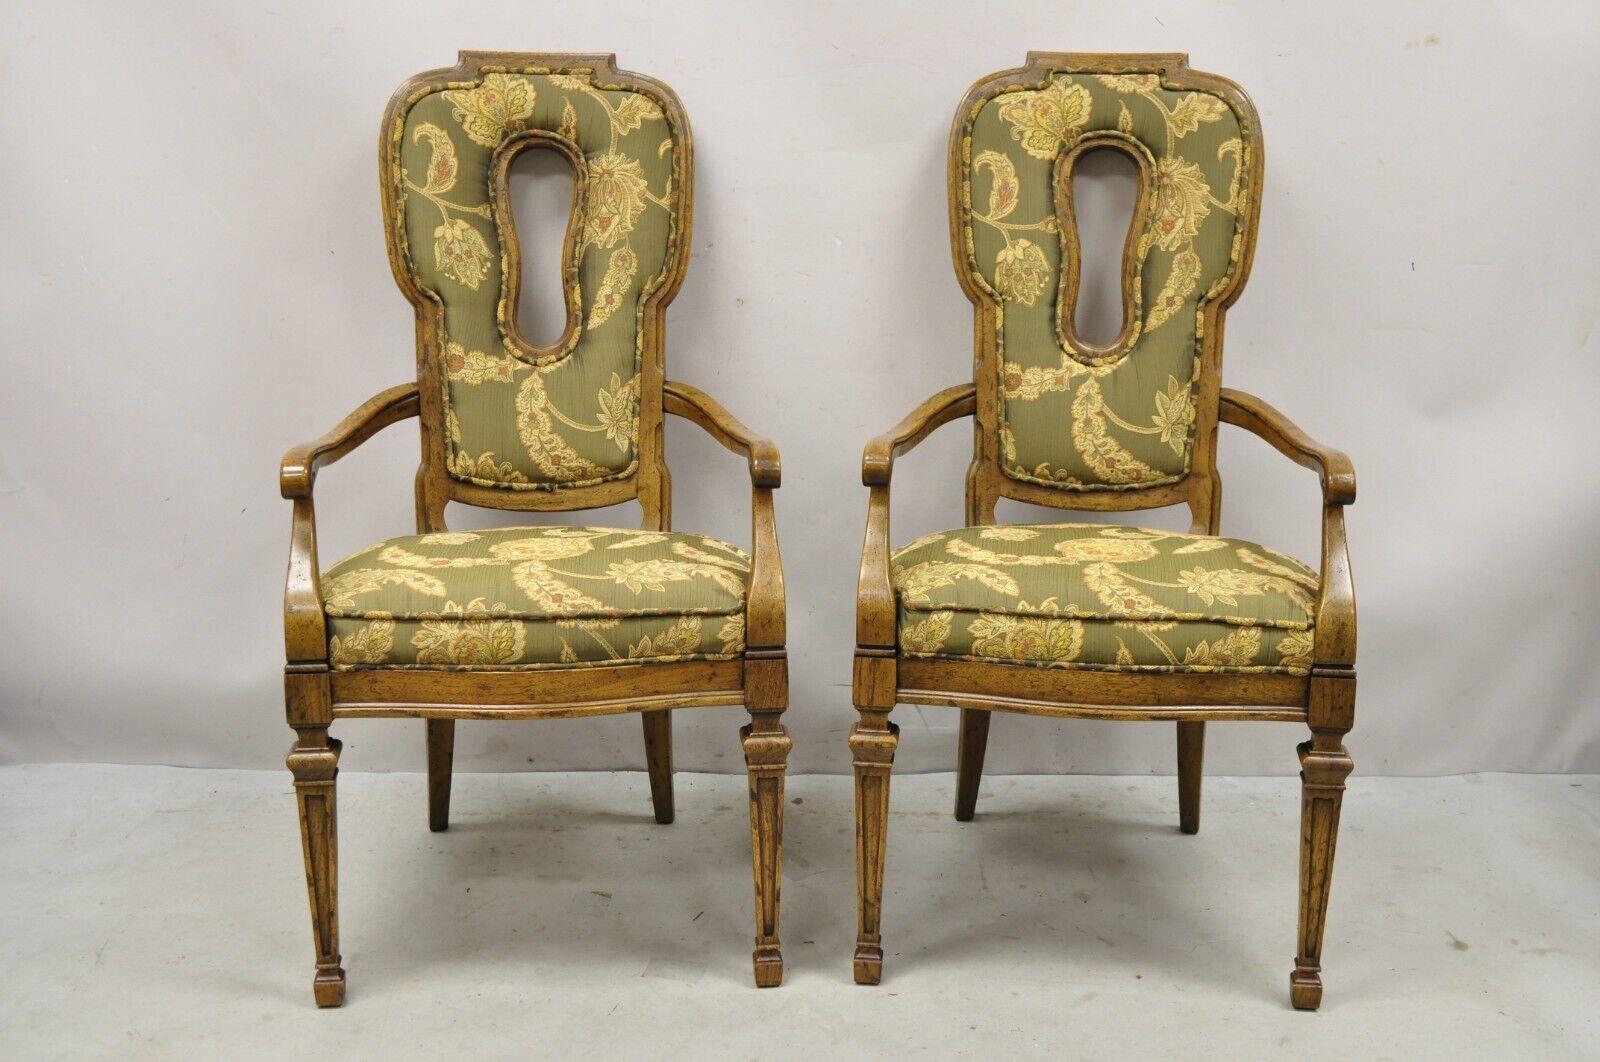 Vintage Hollywood Regency Keyhole Back Fireside Lounge Arm Chairs - a Pair. item features 